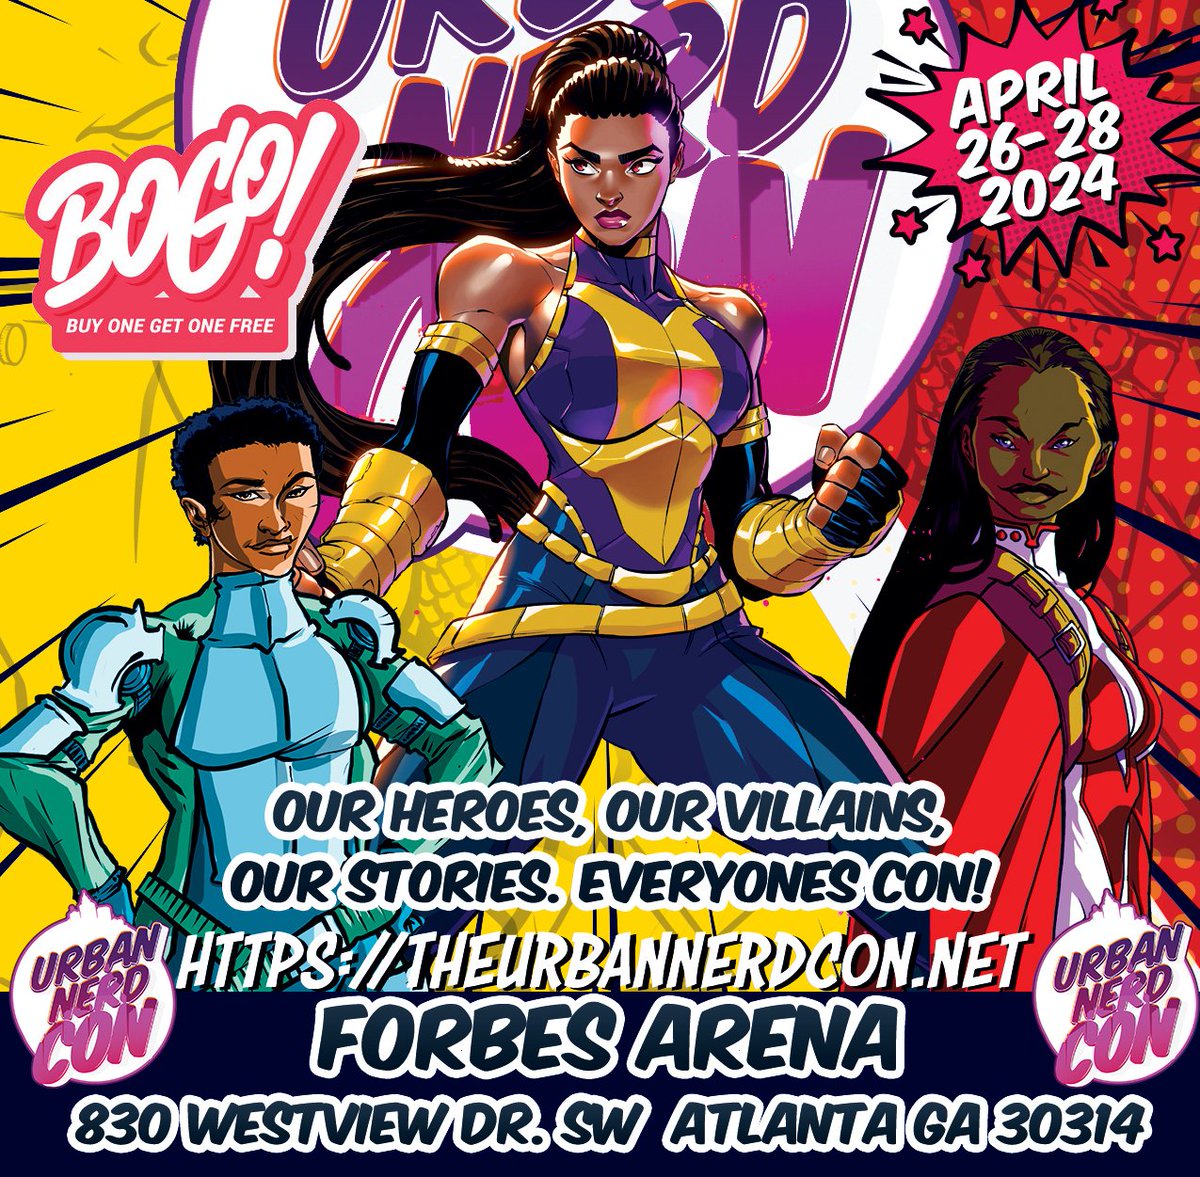 WE ARE MOVING!!! The Urban Nerd Con 2024 is moving to Da House!!! Join us this weekend at Forbes Arena! We apologize for any inconvenience this may cause any guest. We are doing all that we can to help make your experience enjoyable. instagram.com/p/C6EfCedOtc1/…